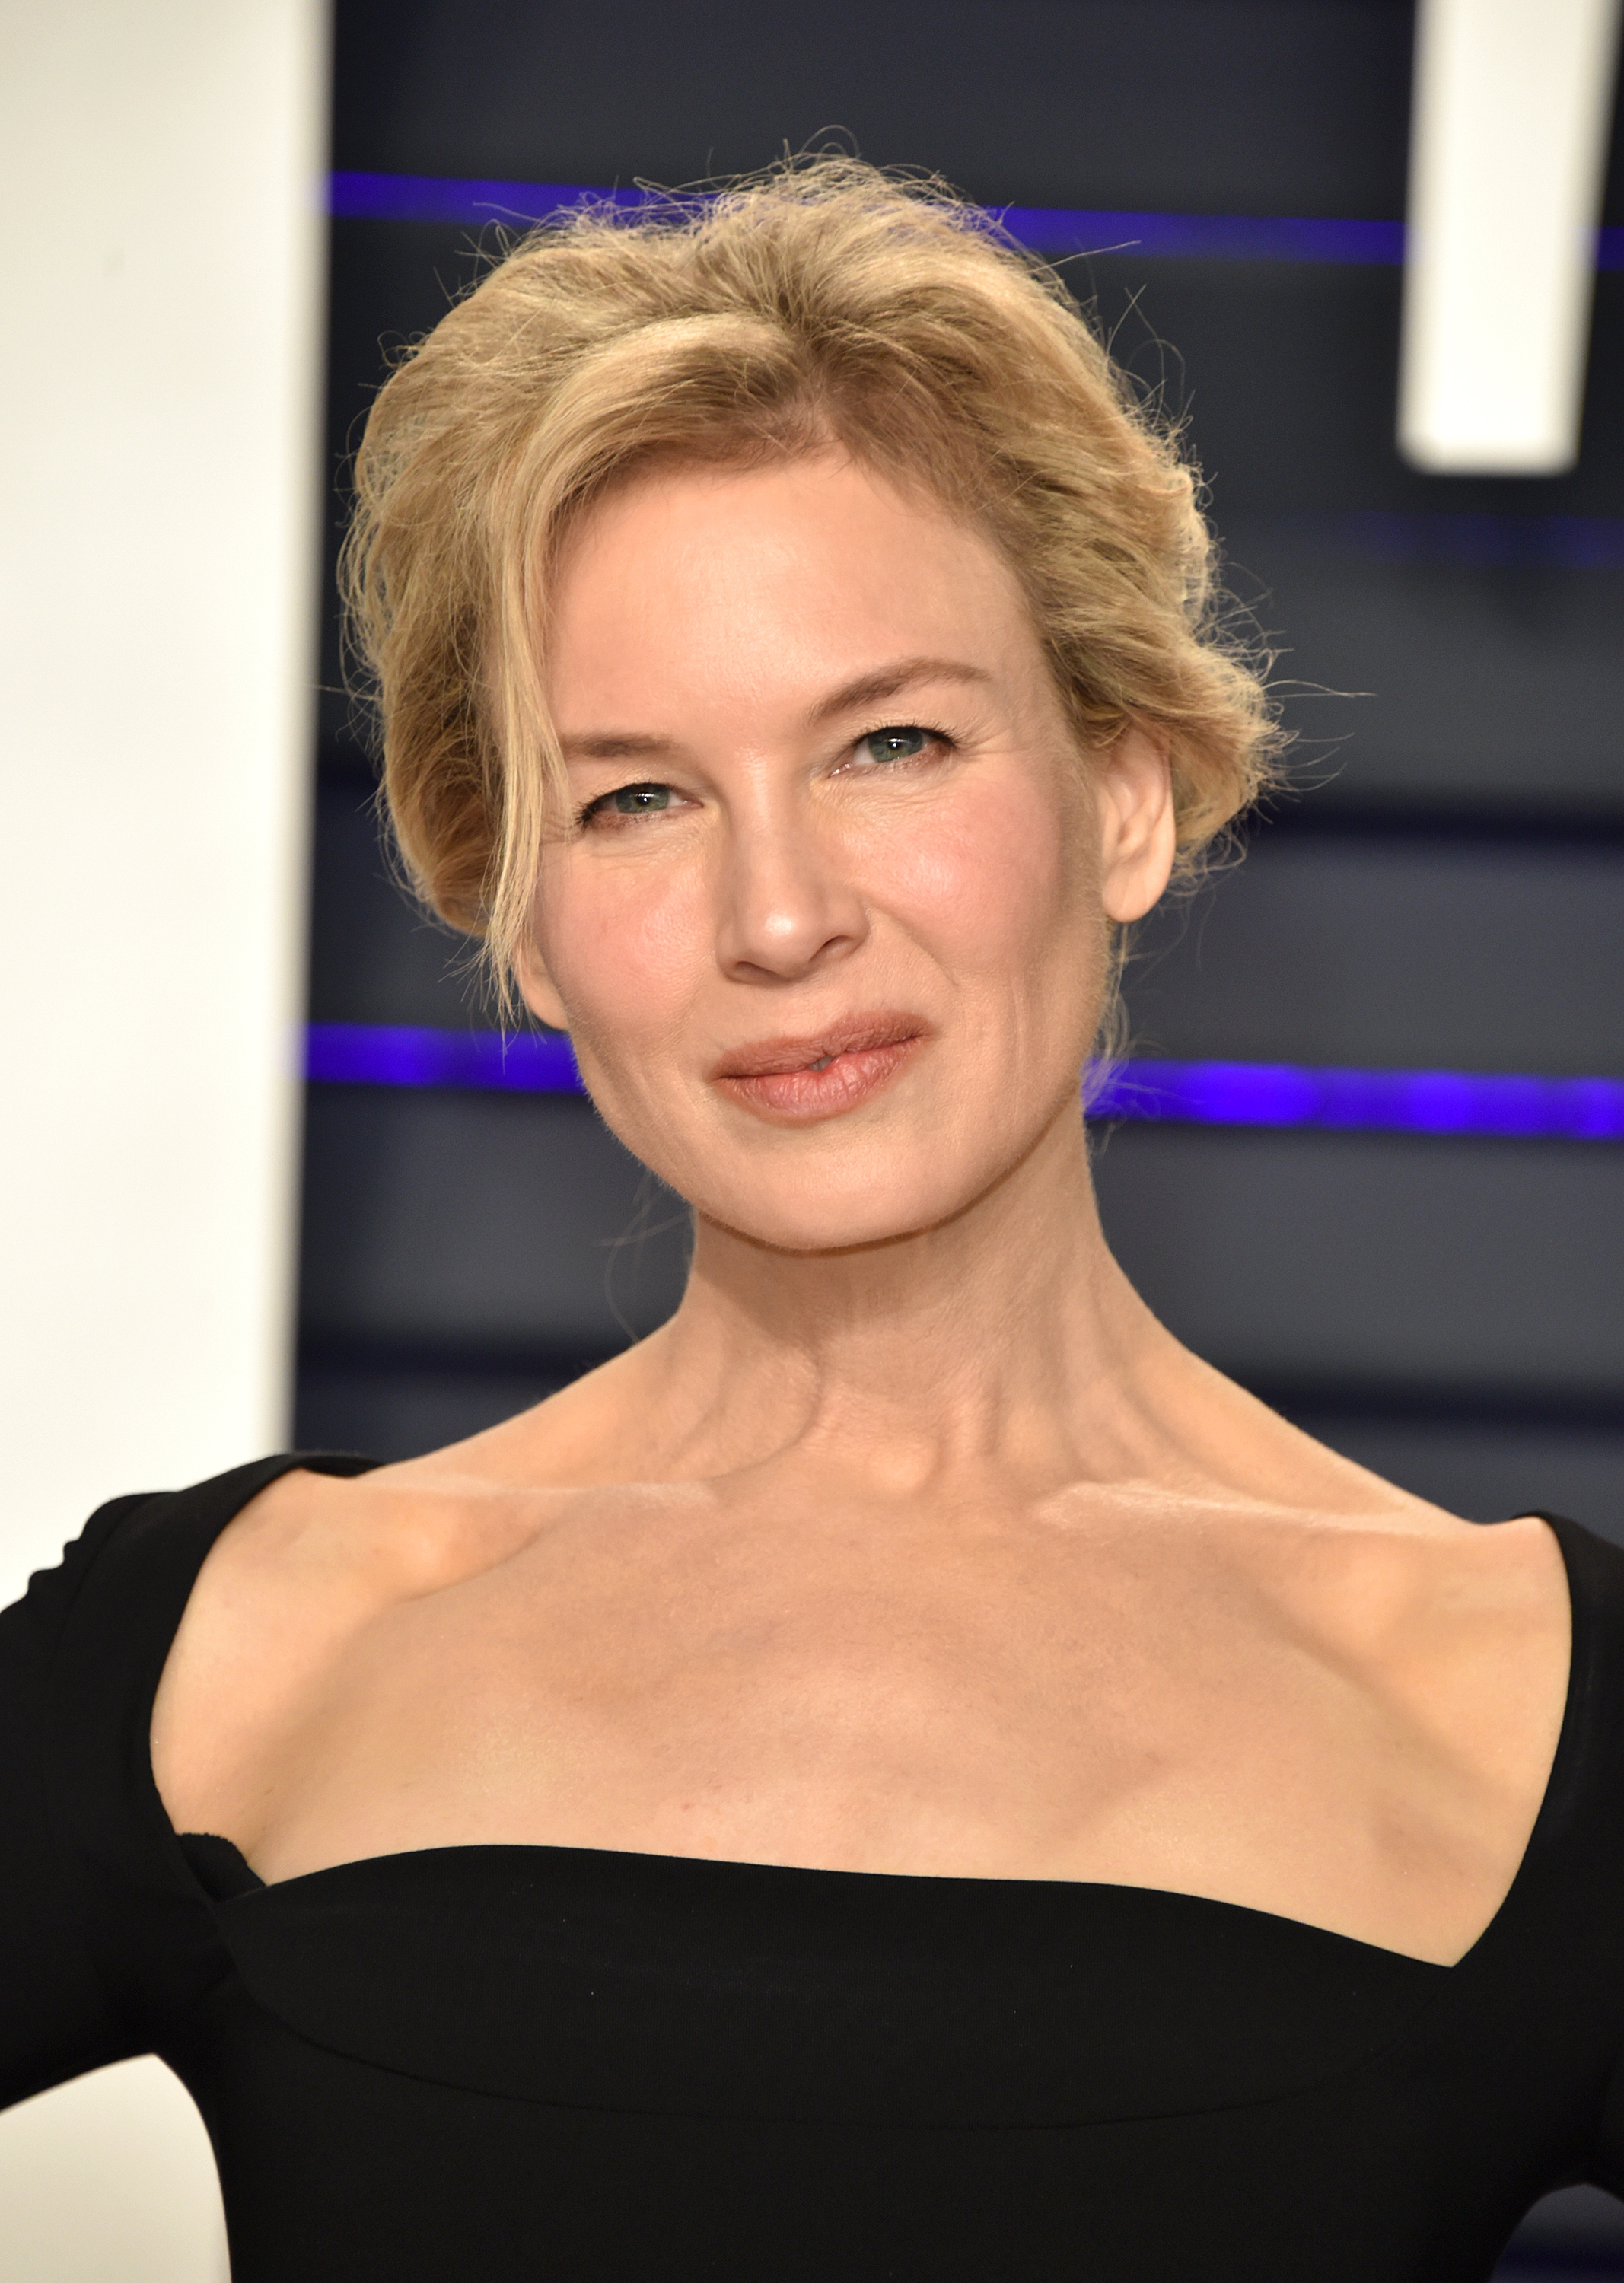 Renée Zellweger at the 2019 Vanity Fair Oscar Party on February 24, 2019, in Beverly Hills, California